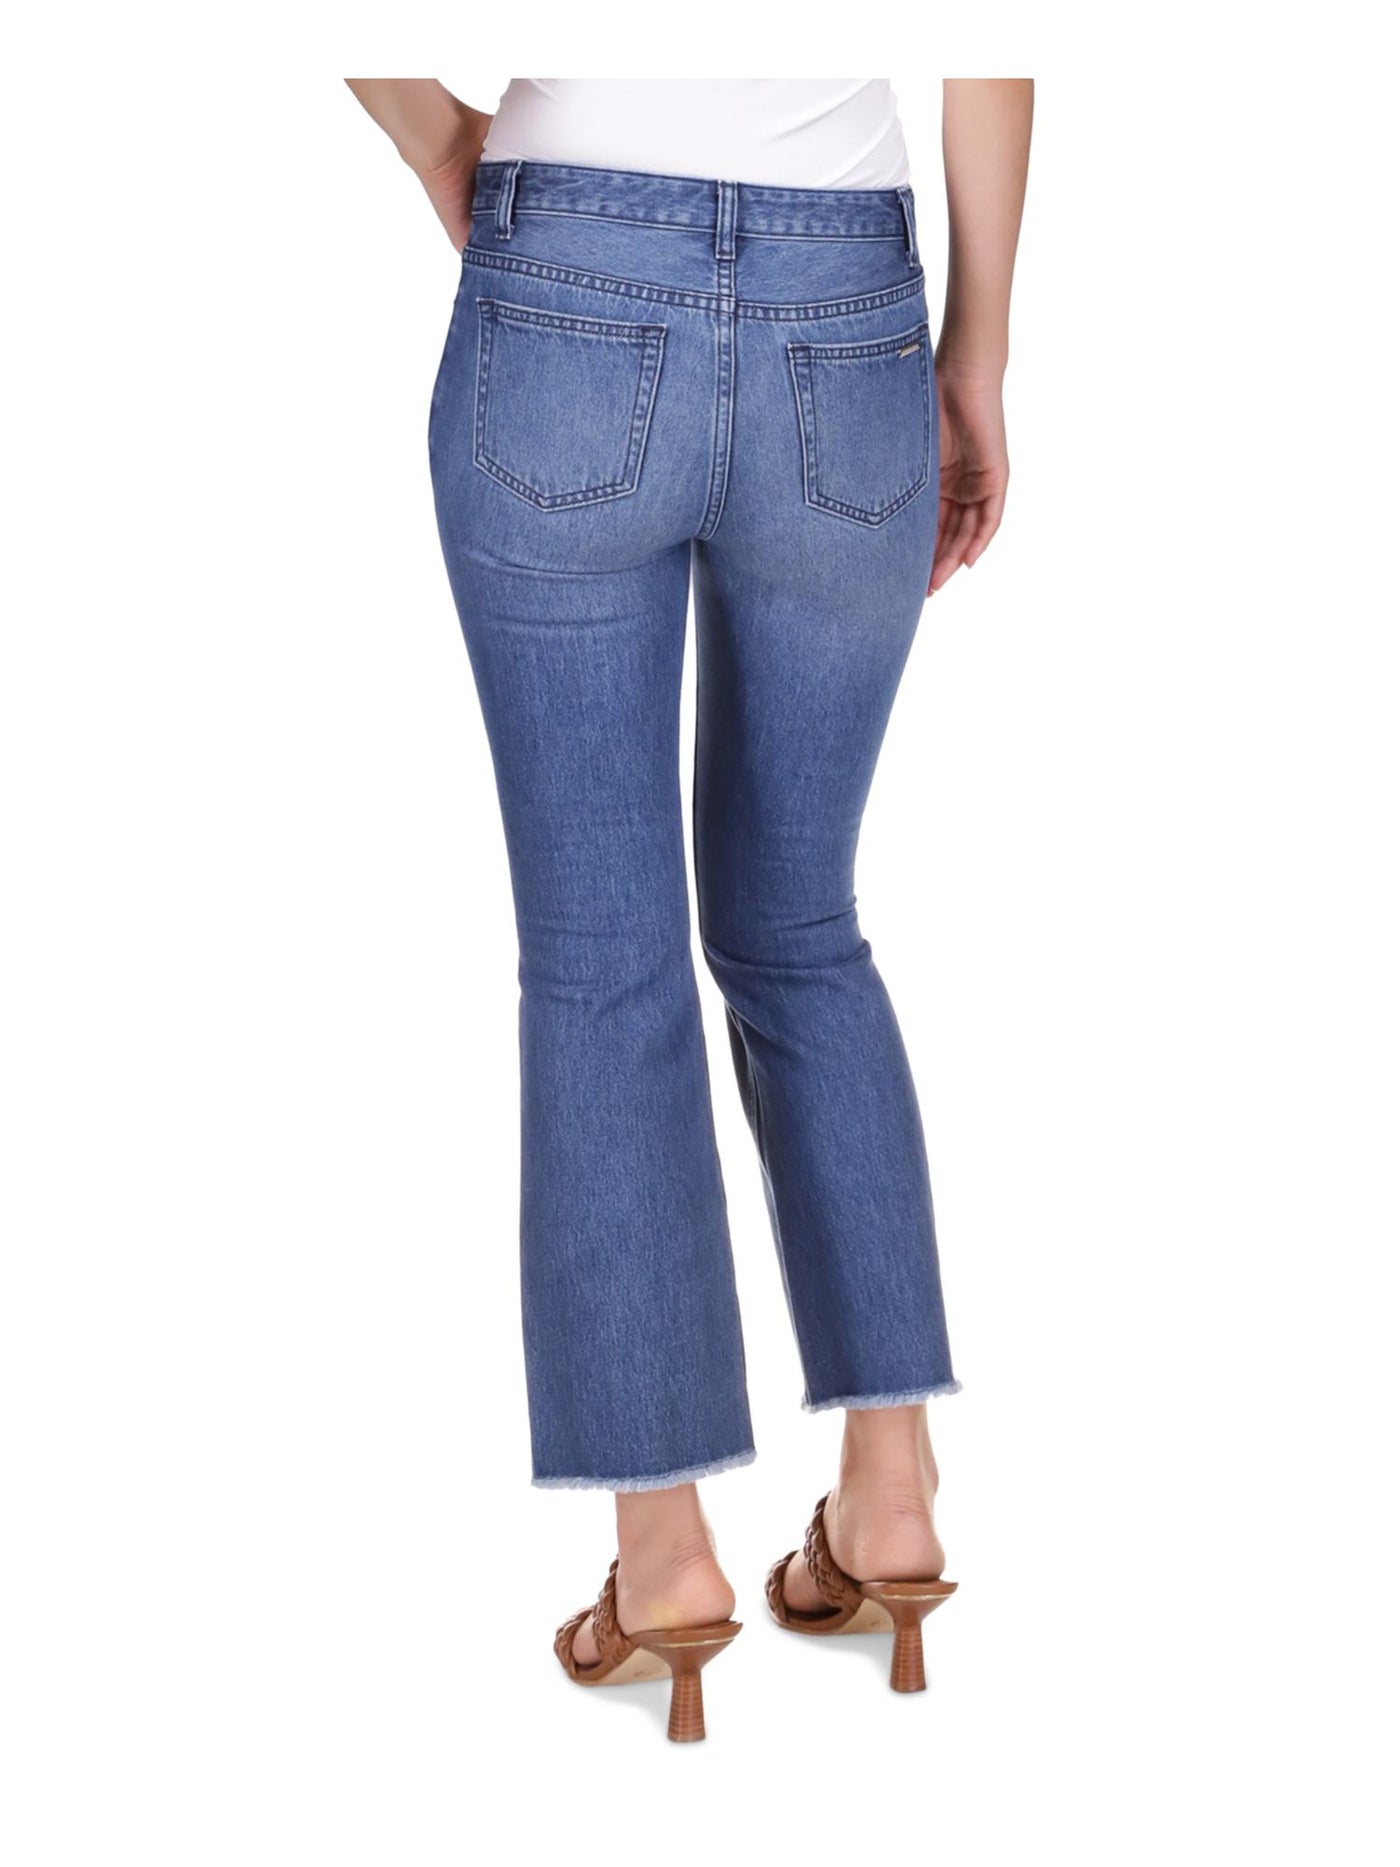 MICHAEL KORS Womens Blue Pocketed Button Fly Flare Cropped Raw Hem High Waist Jeans 10